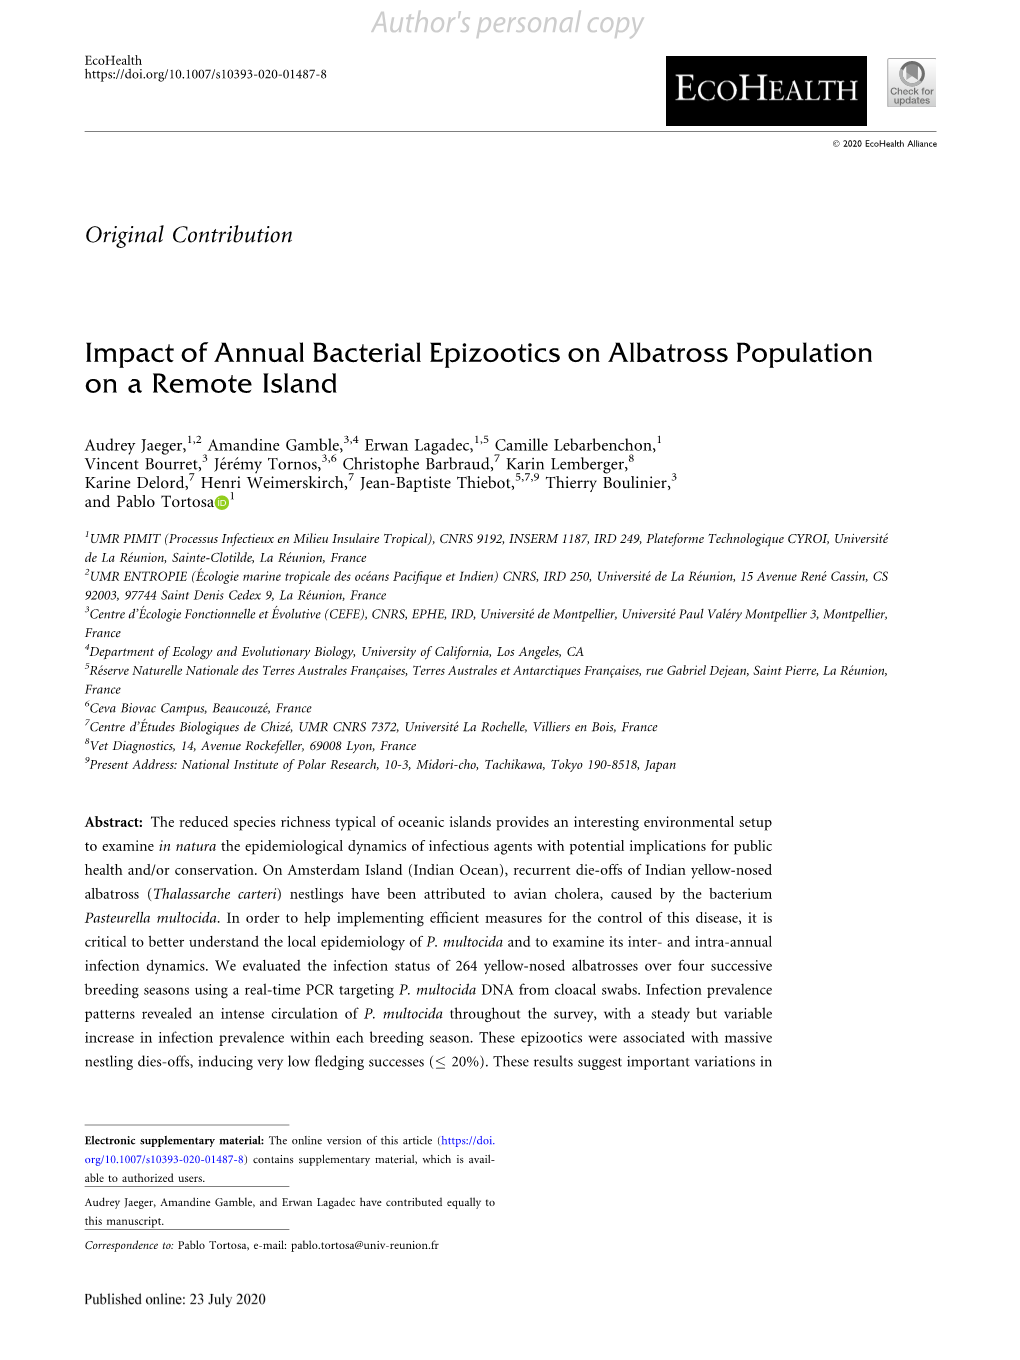 Impact of Annual Bacterial Epizootics on Albatross Population on a Remote Island